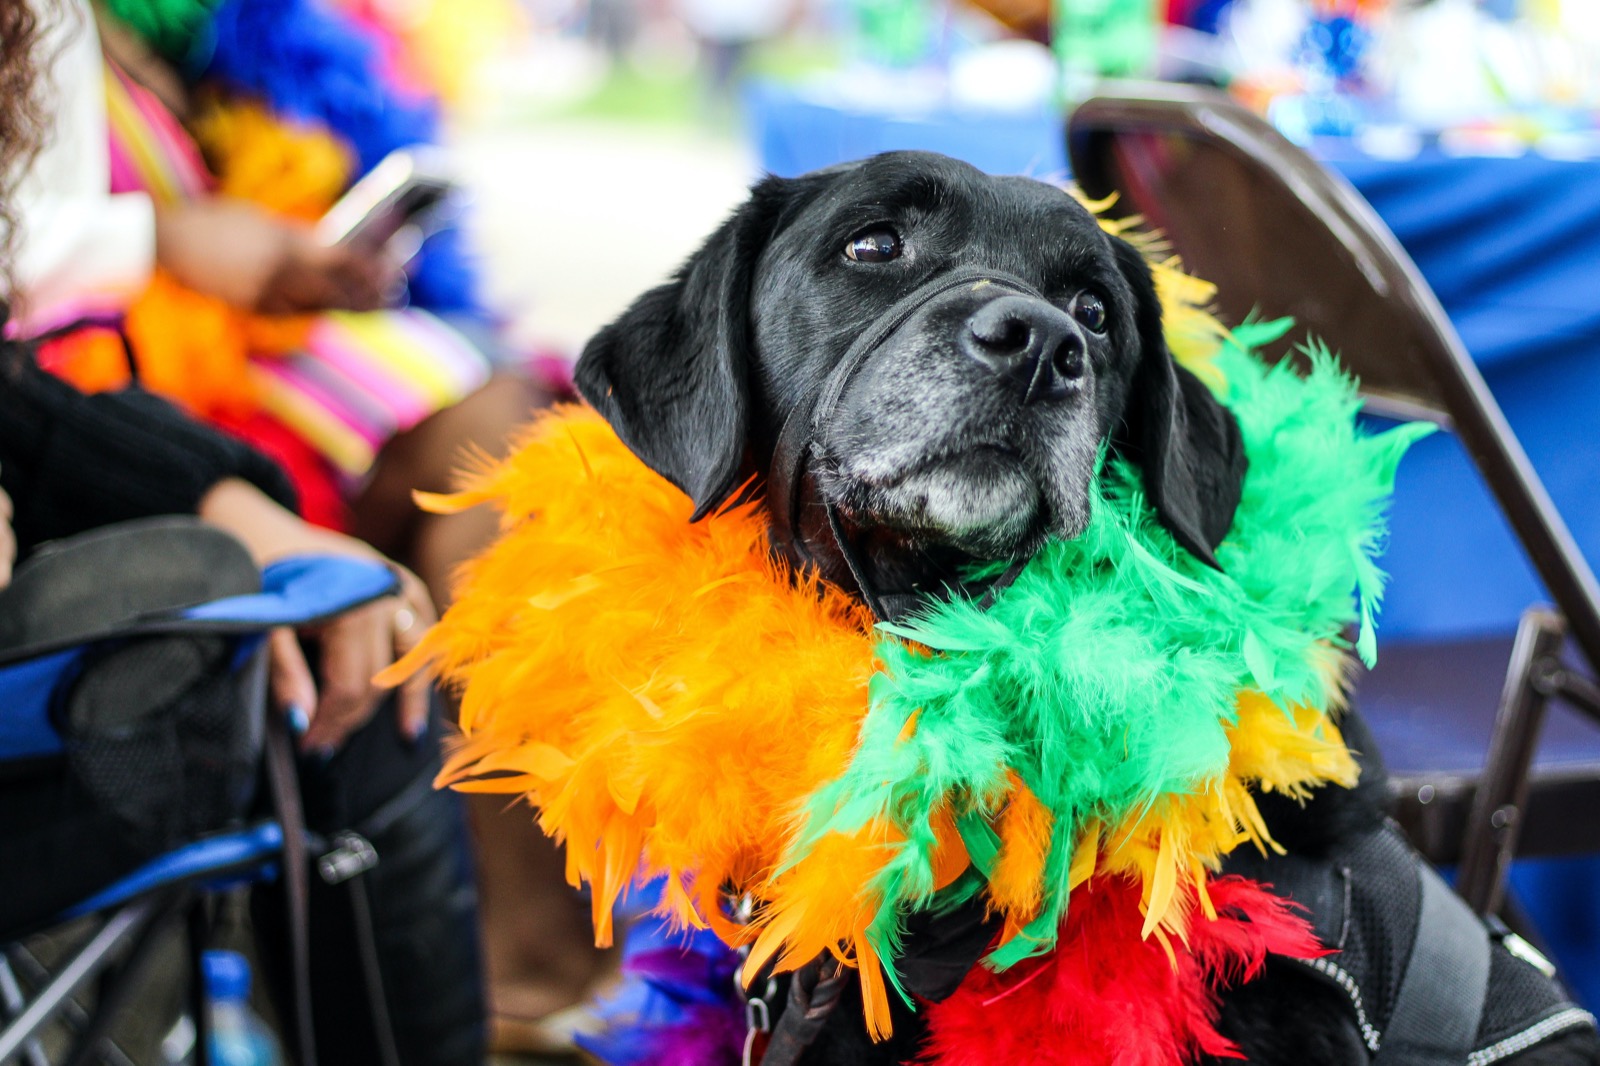 Are You A Black Cat Or Golden Retriever? Quiz Dog at music festival